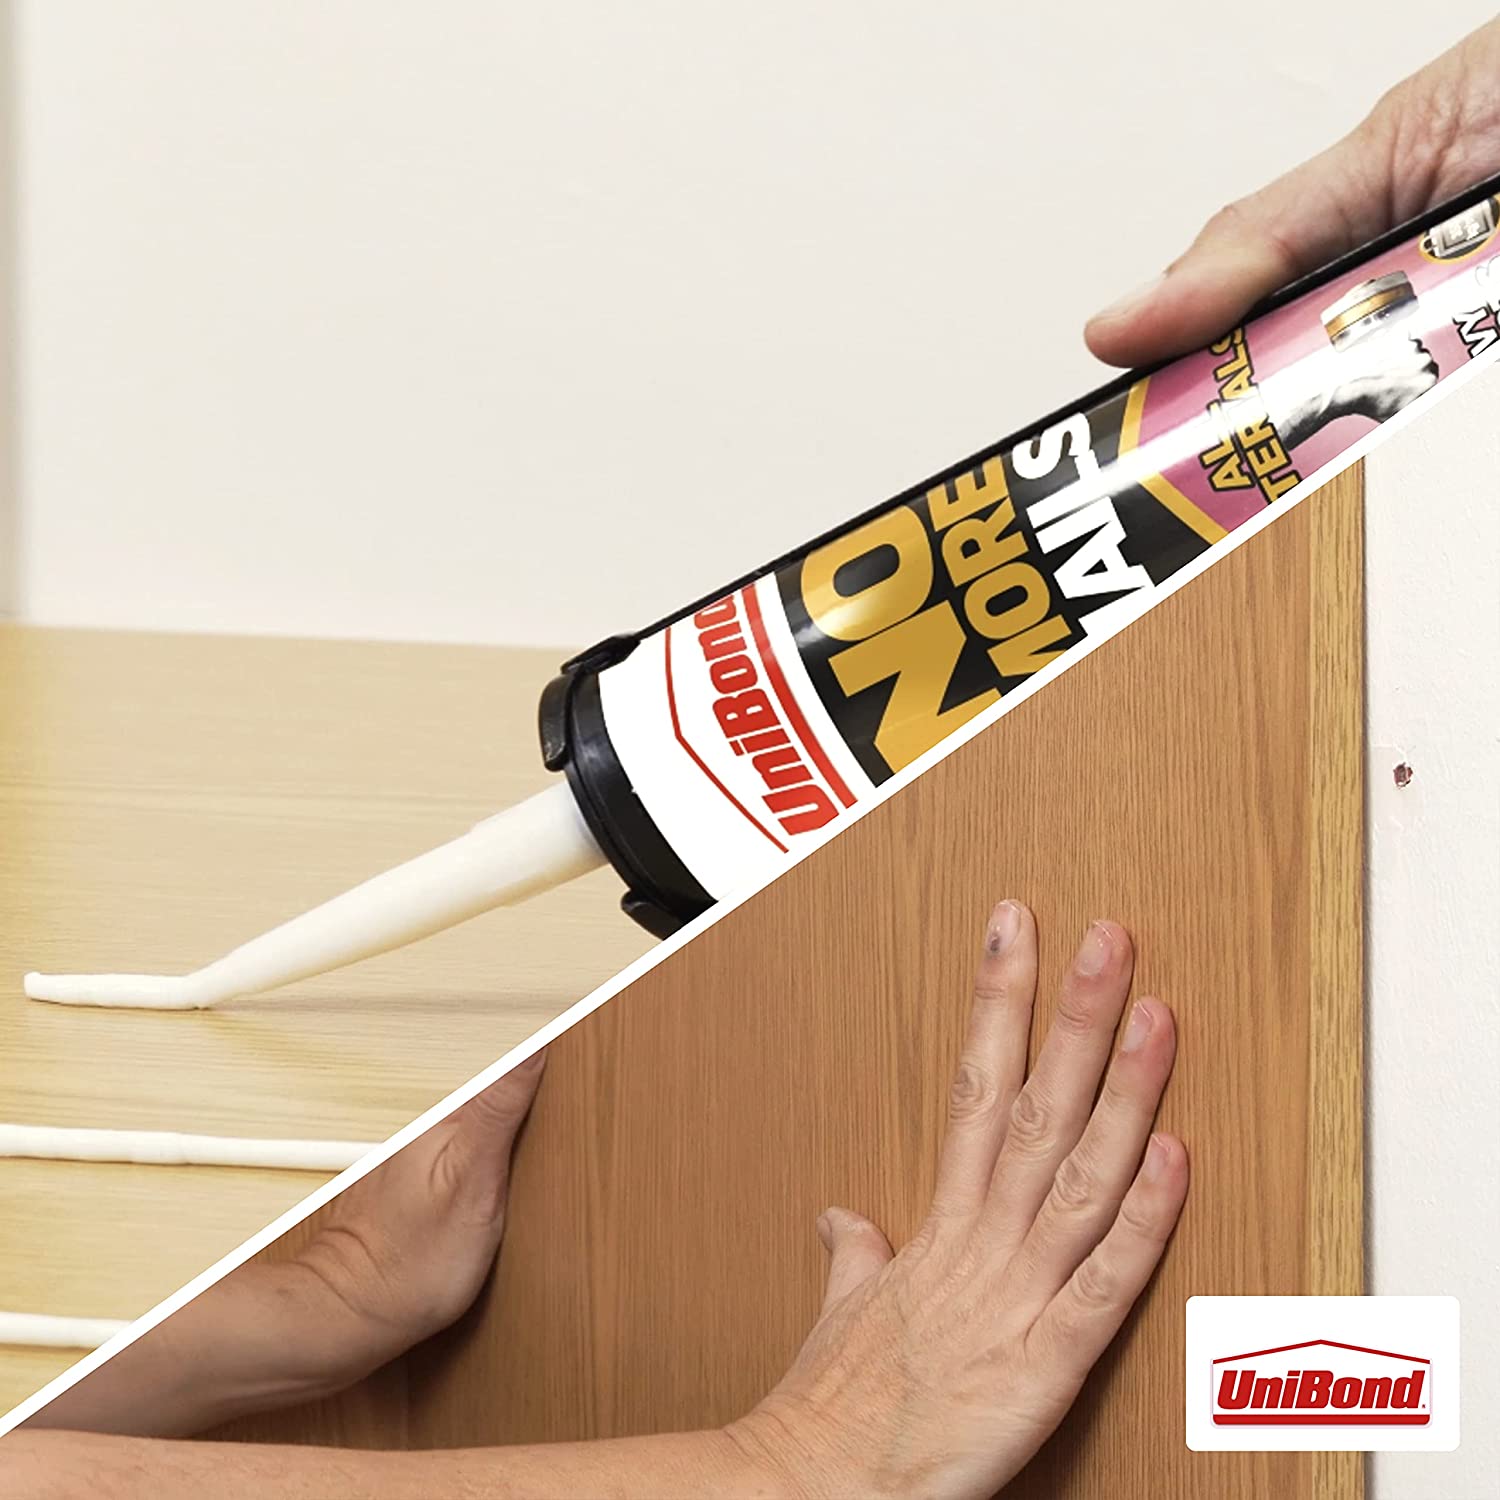 Adhesives | Unibond No More Nails All Materials Heavy Objects by Weirs of Baggot St